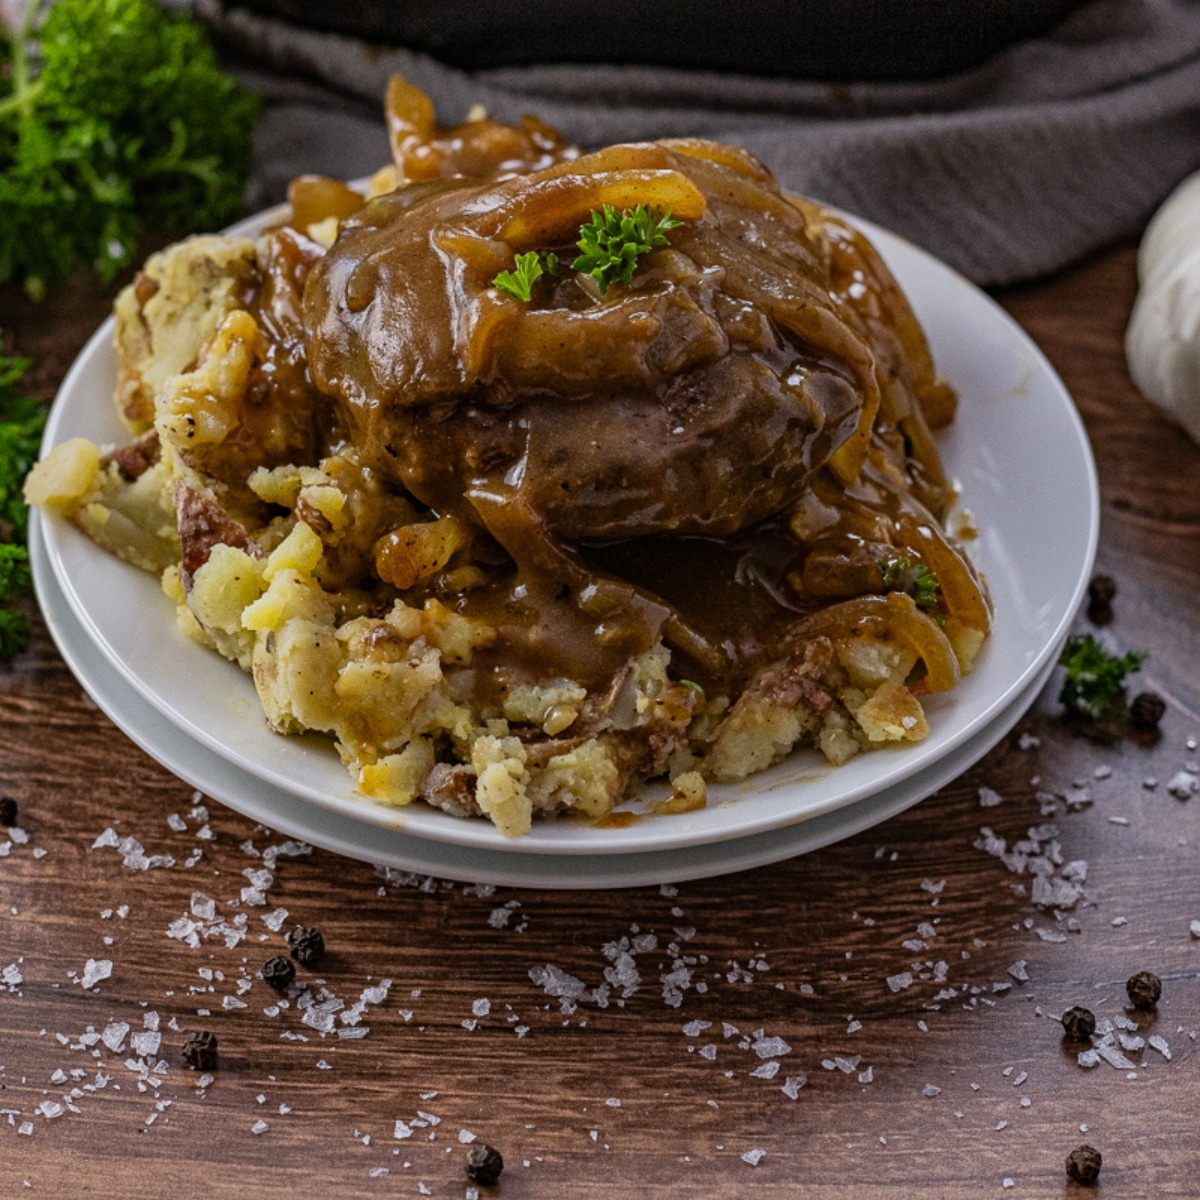 steak made from ground beef topped with onion gravy